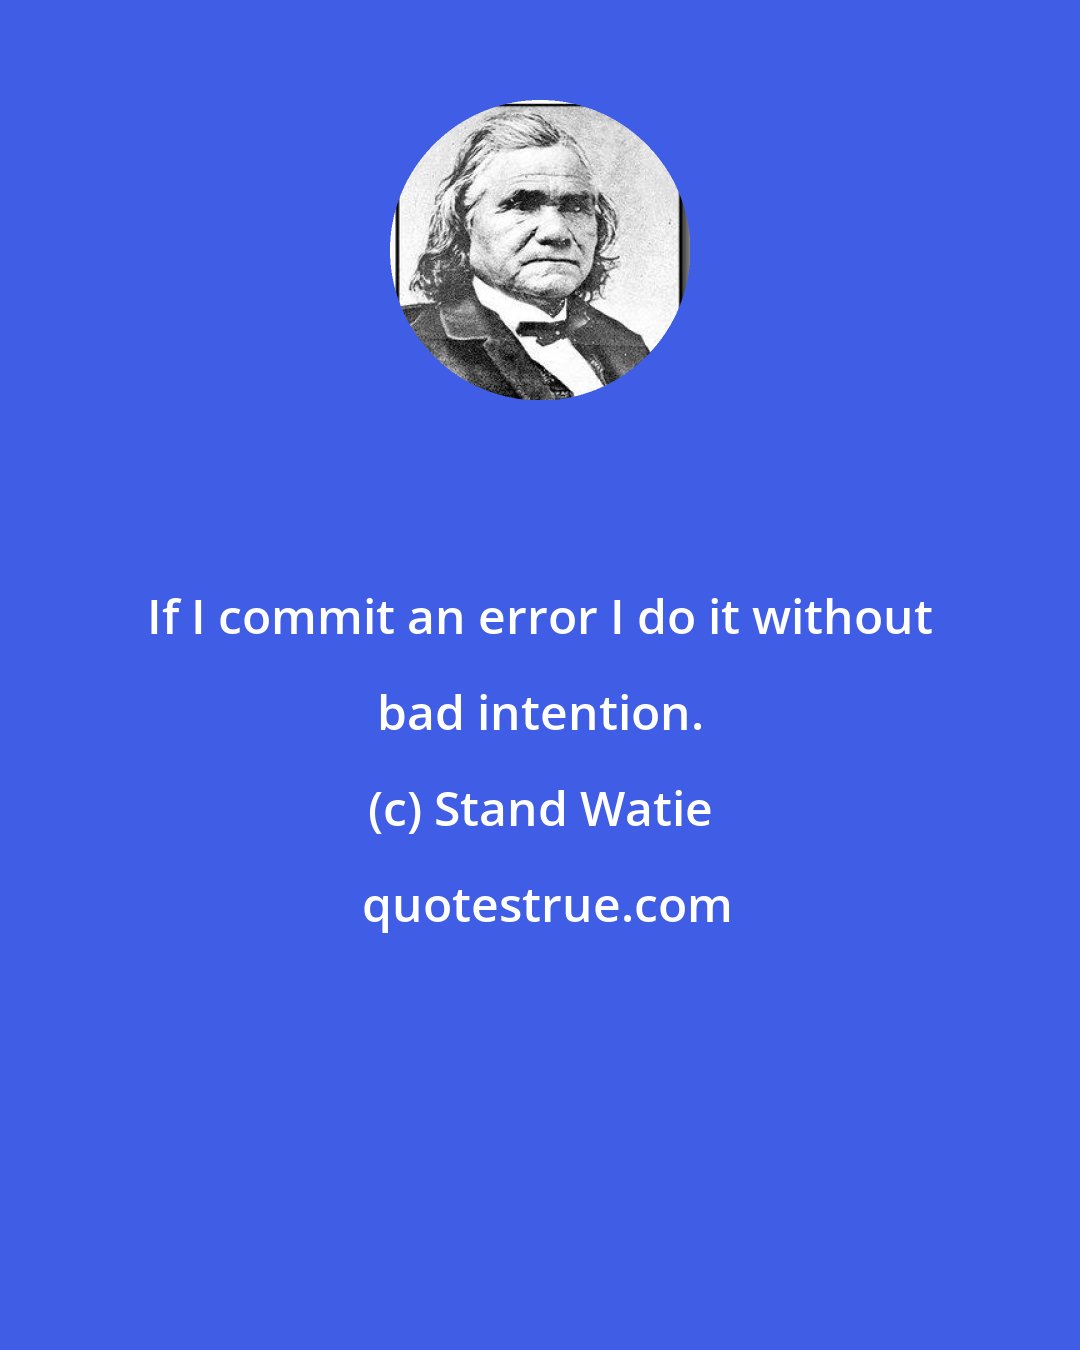 Stand Watie: If I commit an error I do it without bad intention.